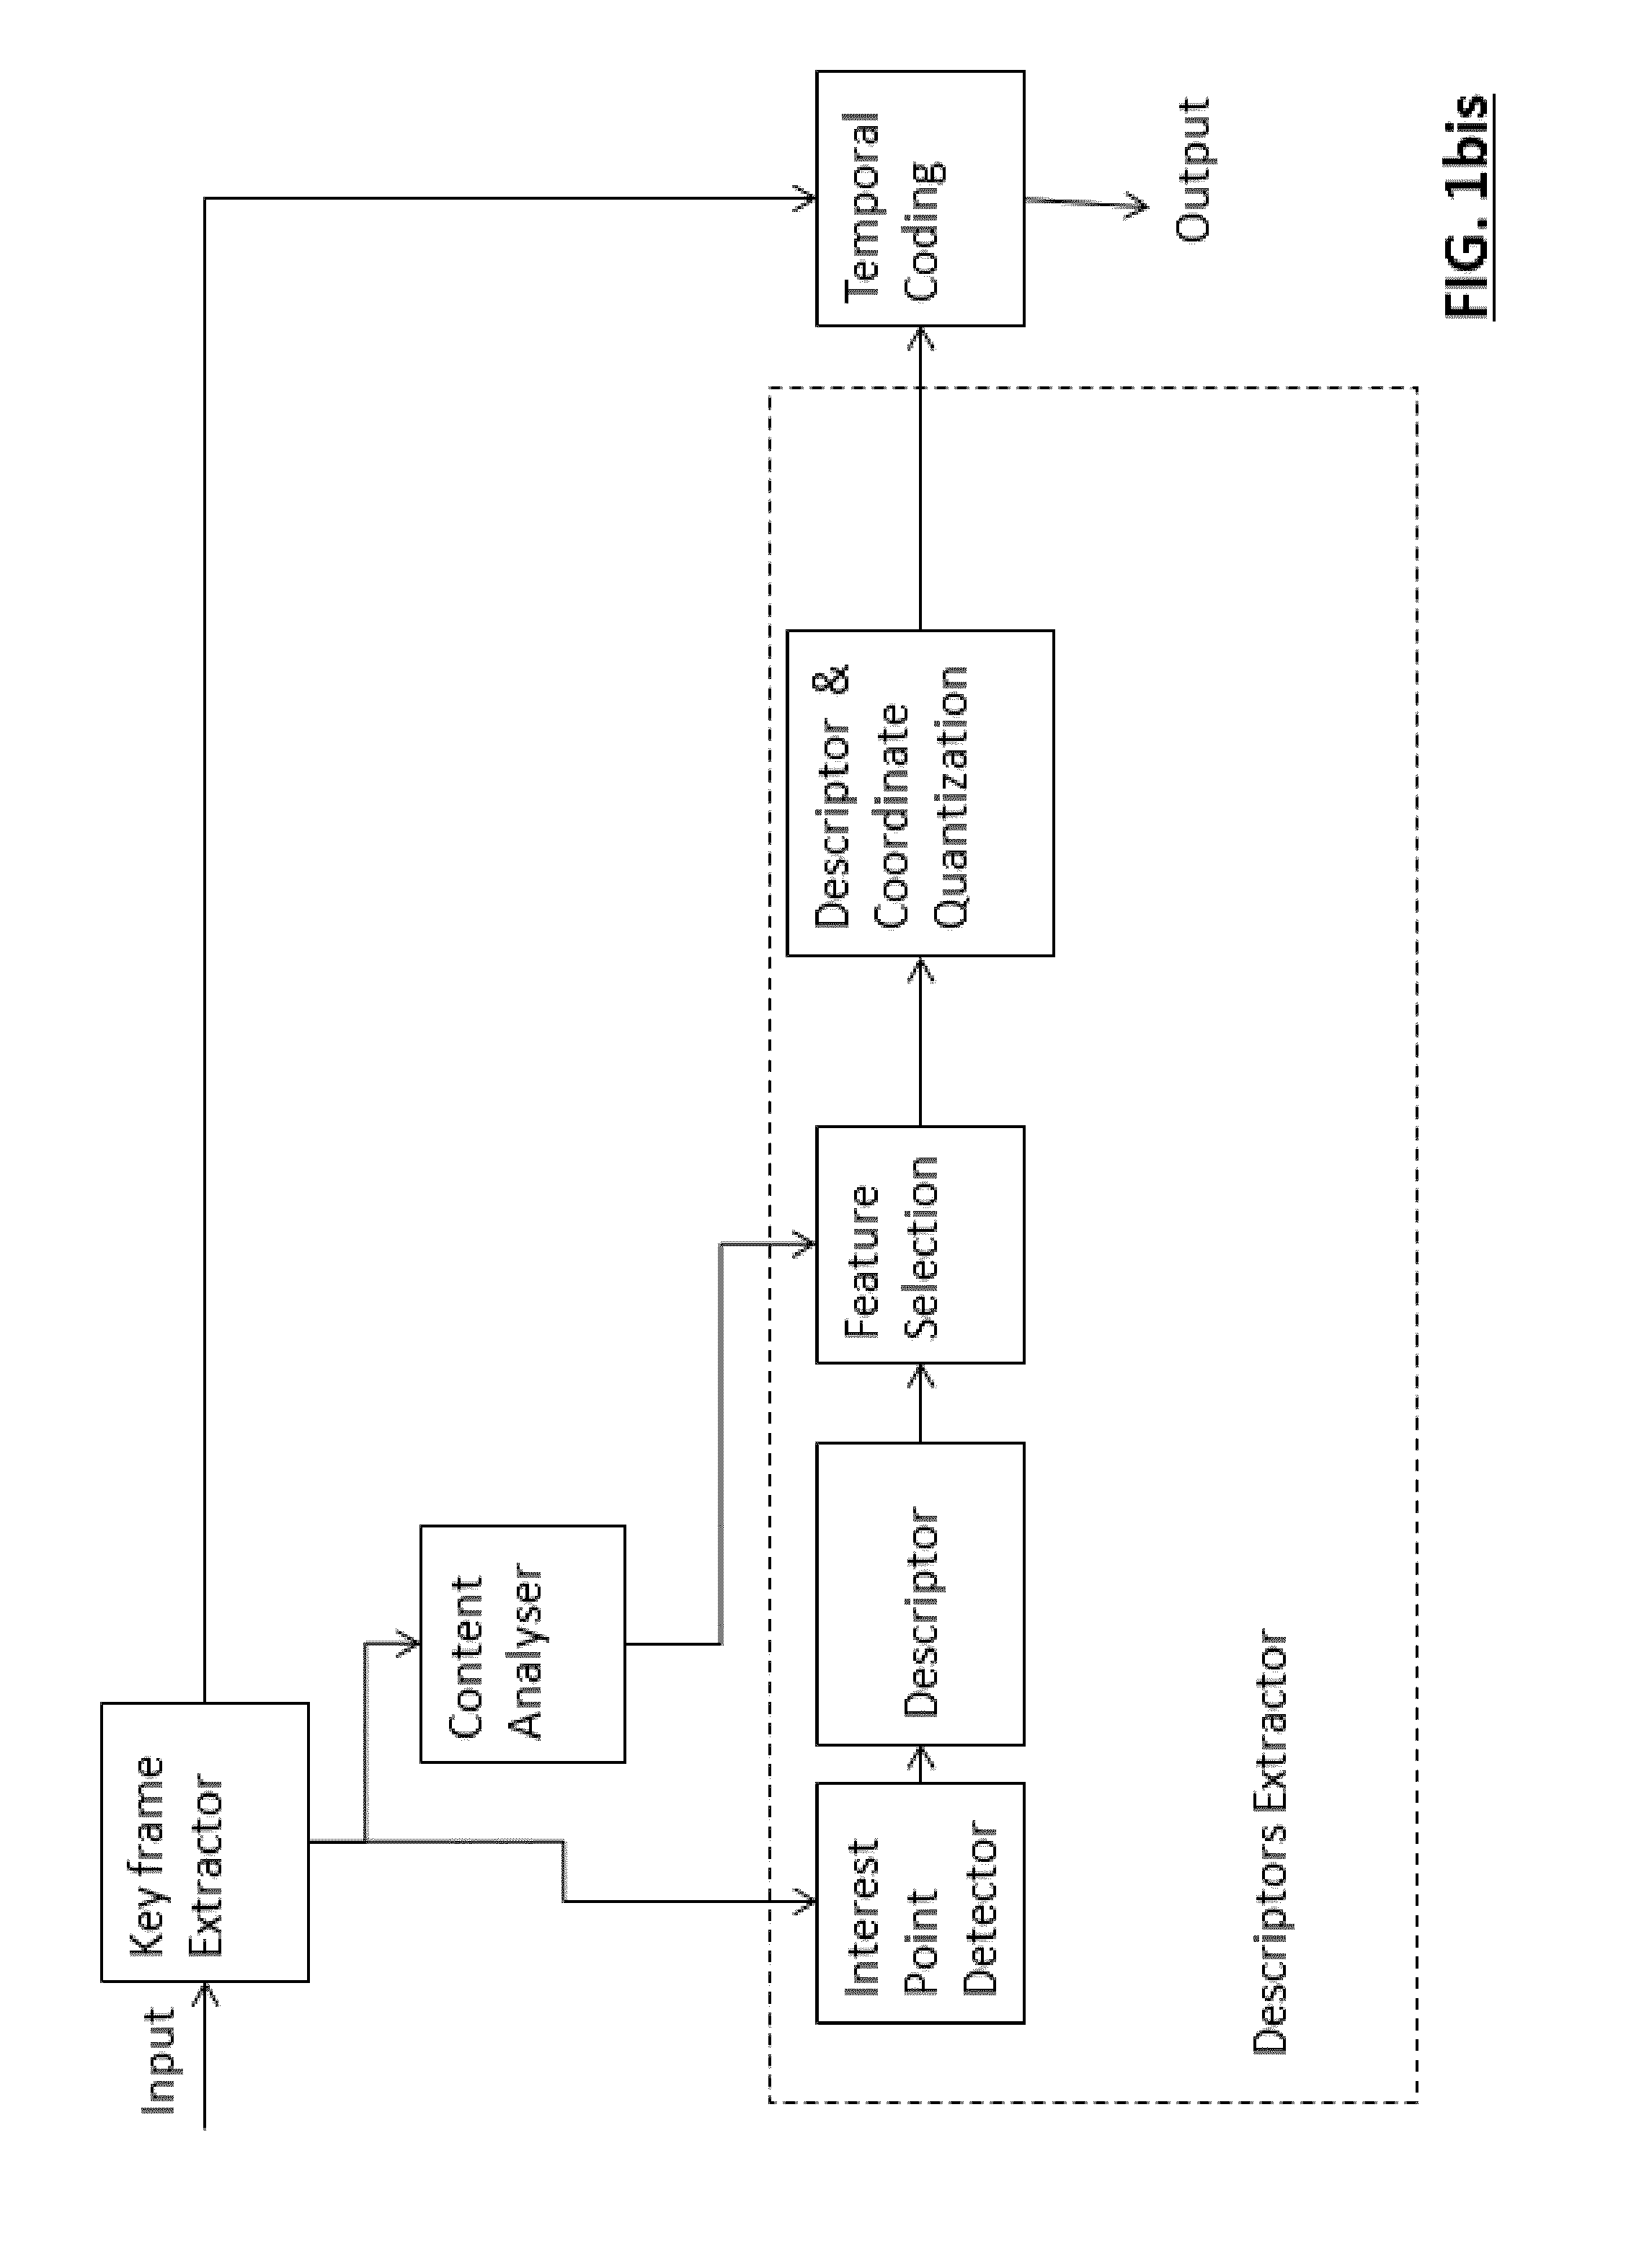 Method and an apparatus for the extraction of descriptors from video content, preferably for search and retrieval purpose